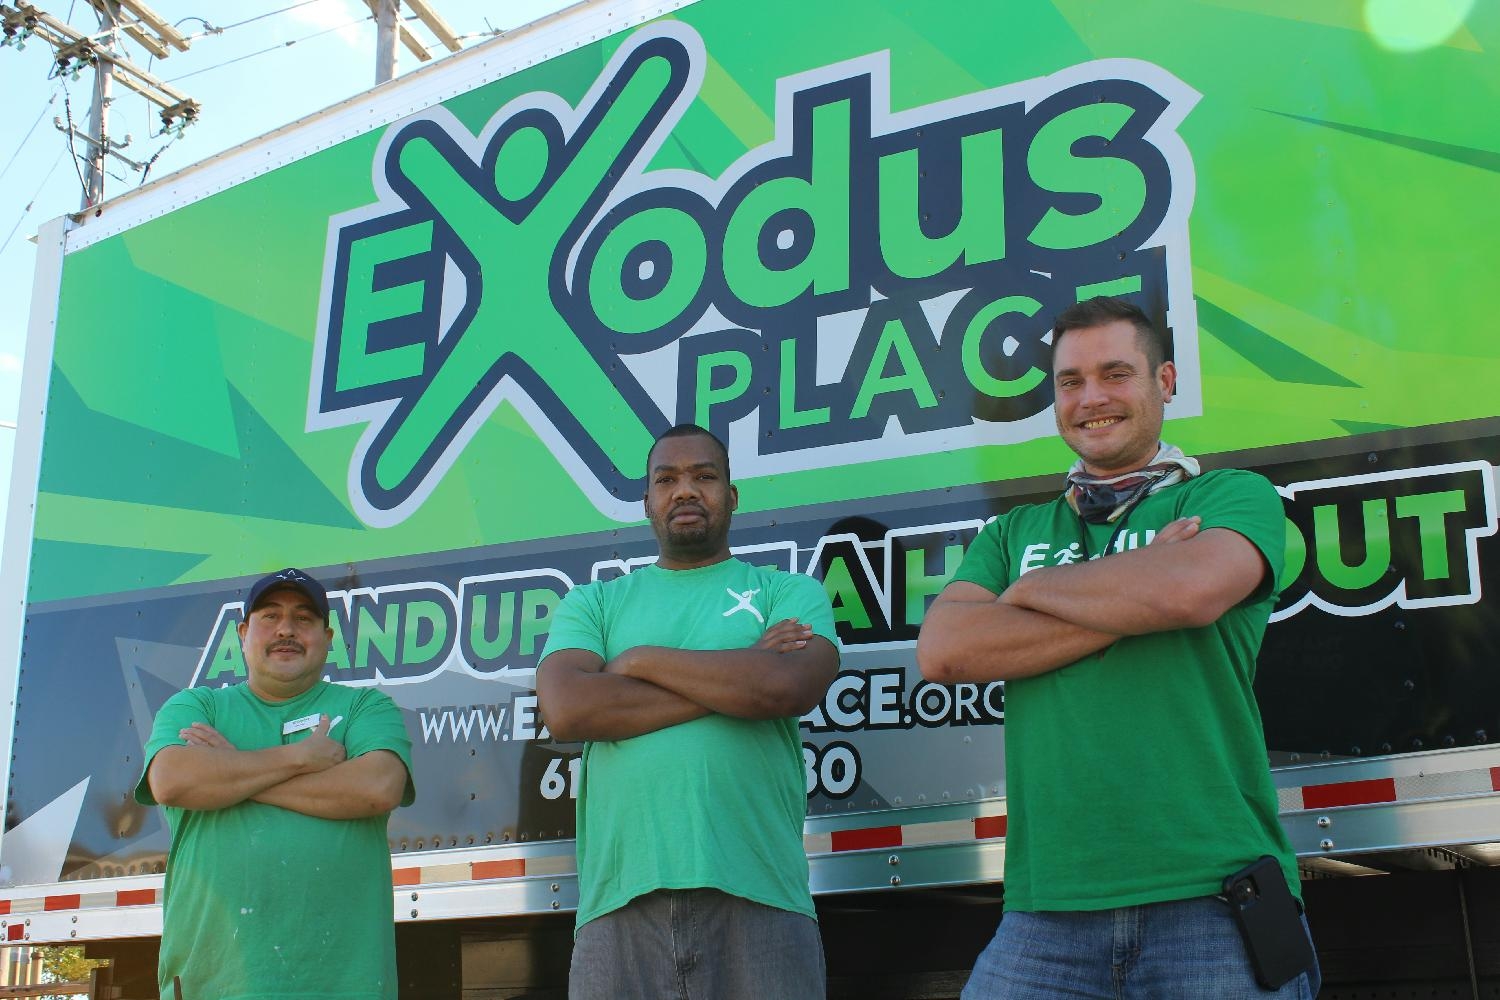 Exodus Place restores the pride and dignity to men who have fallen on hard time.